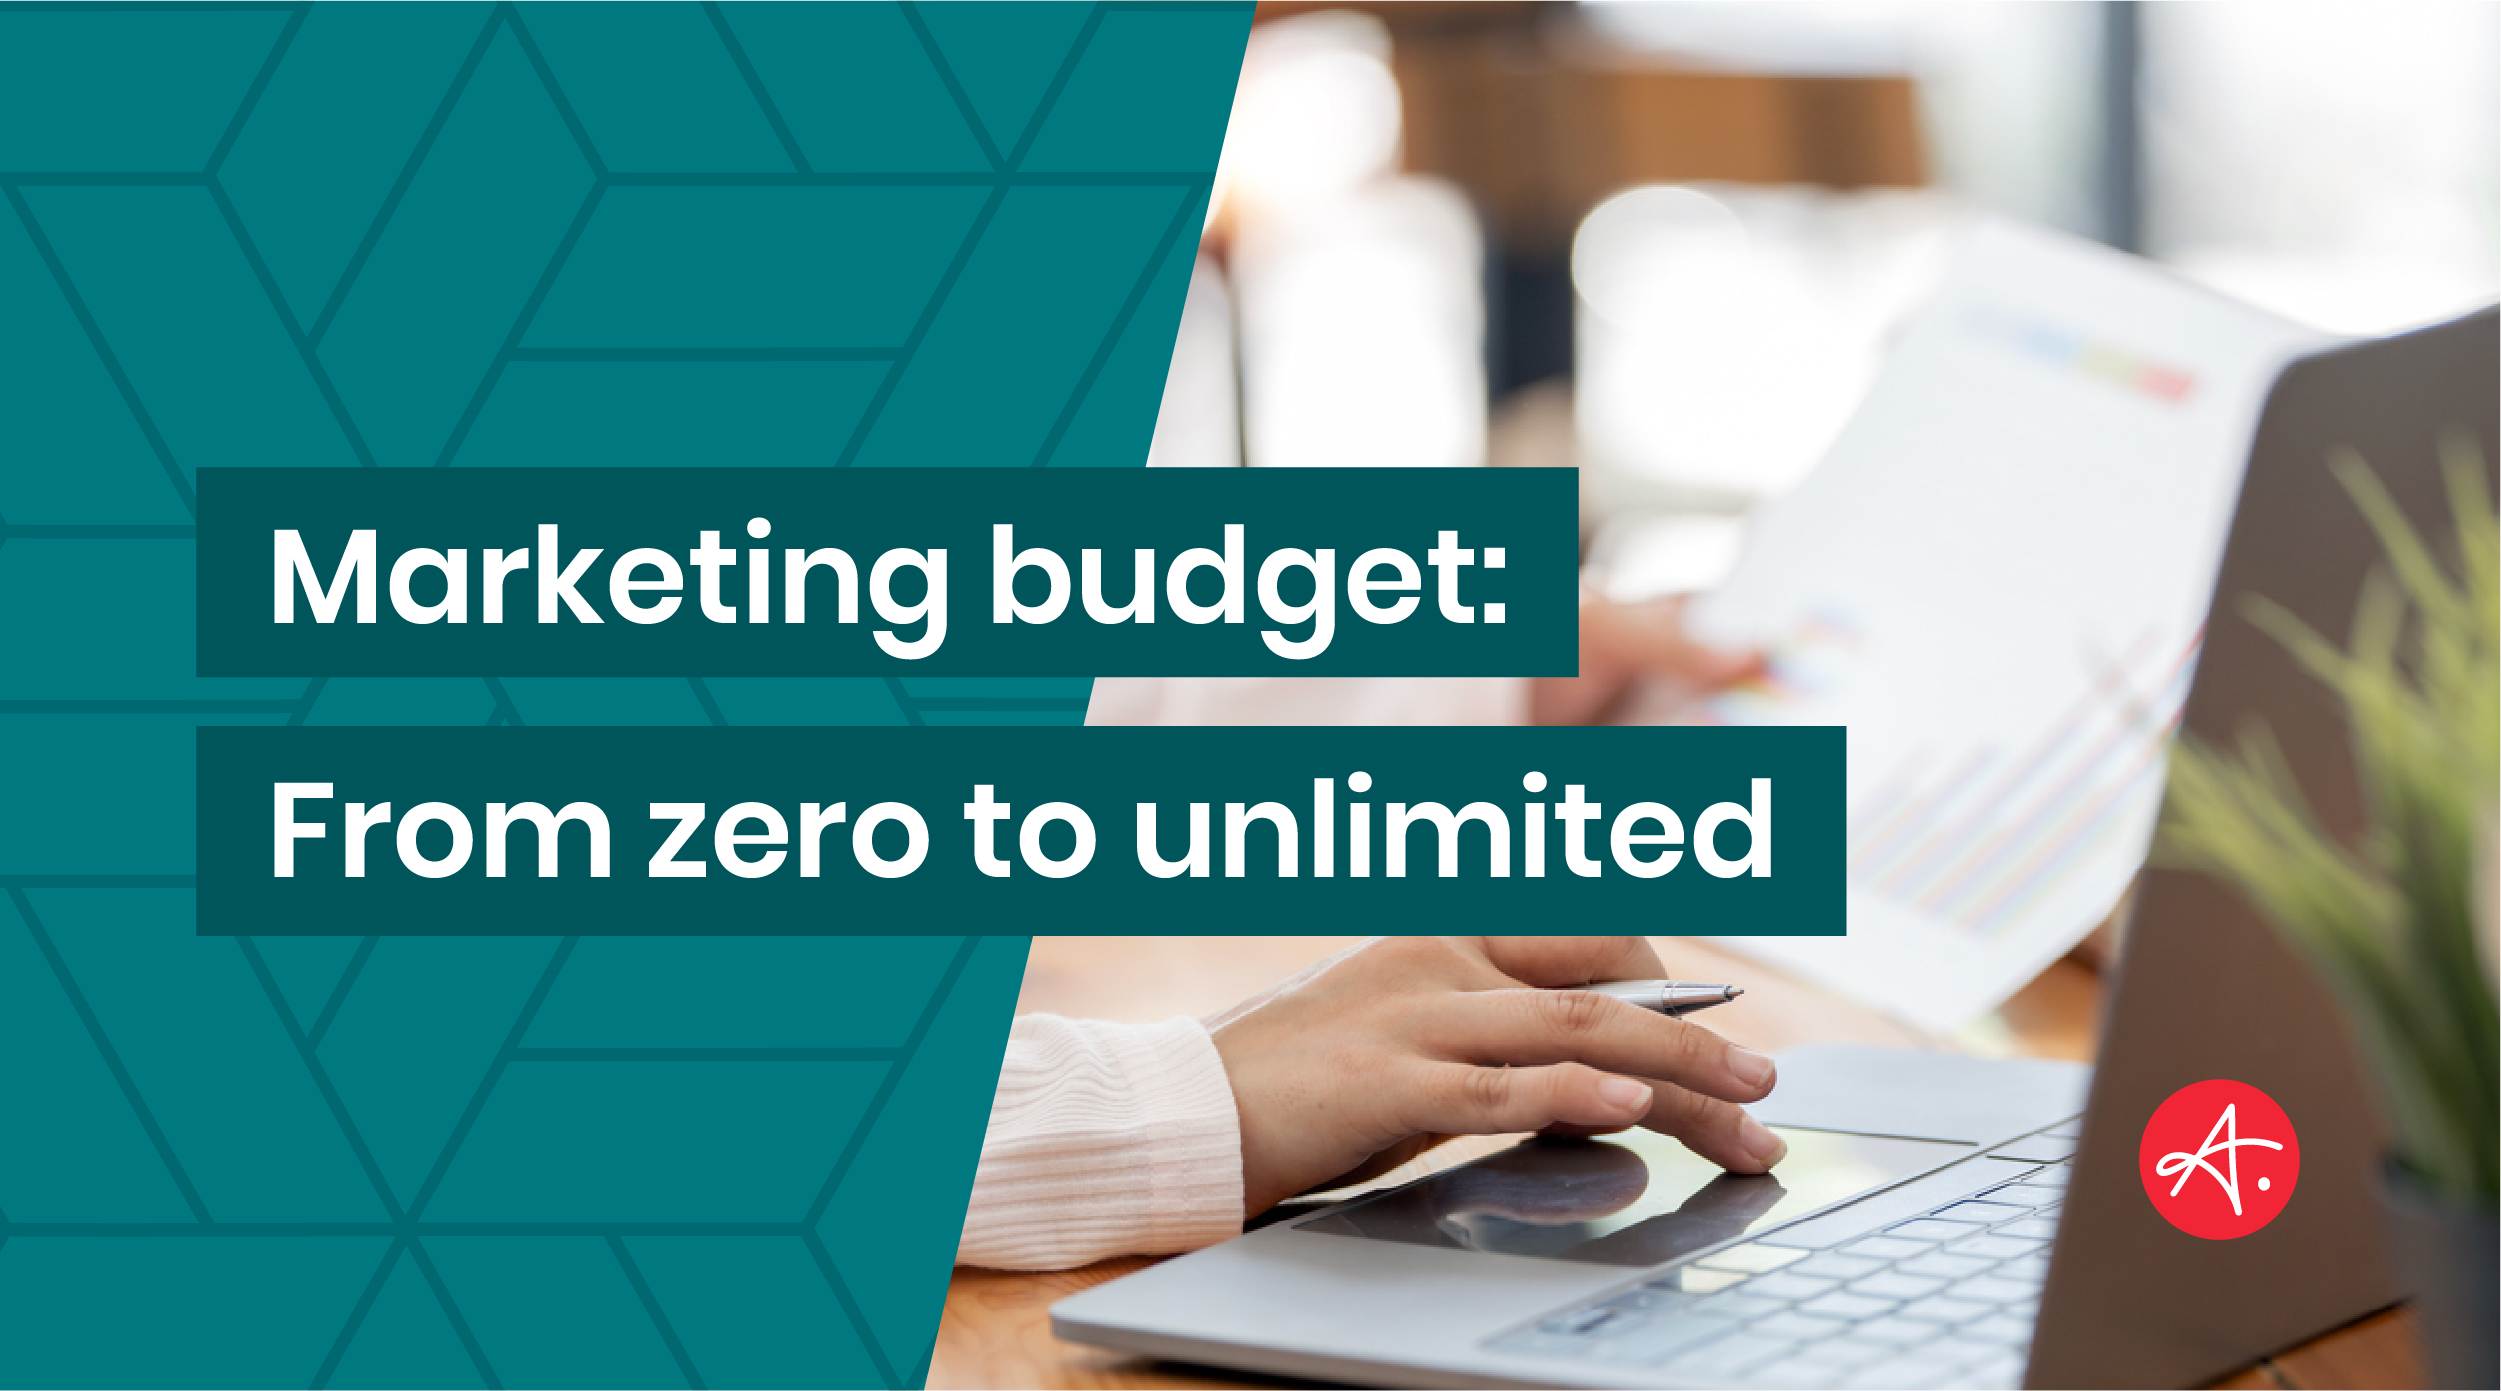 Marketing budget: From zero to unlimited